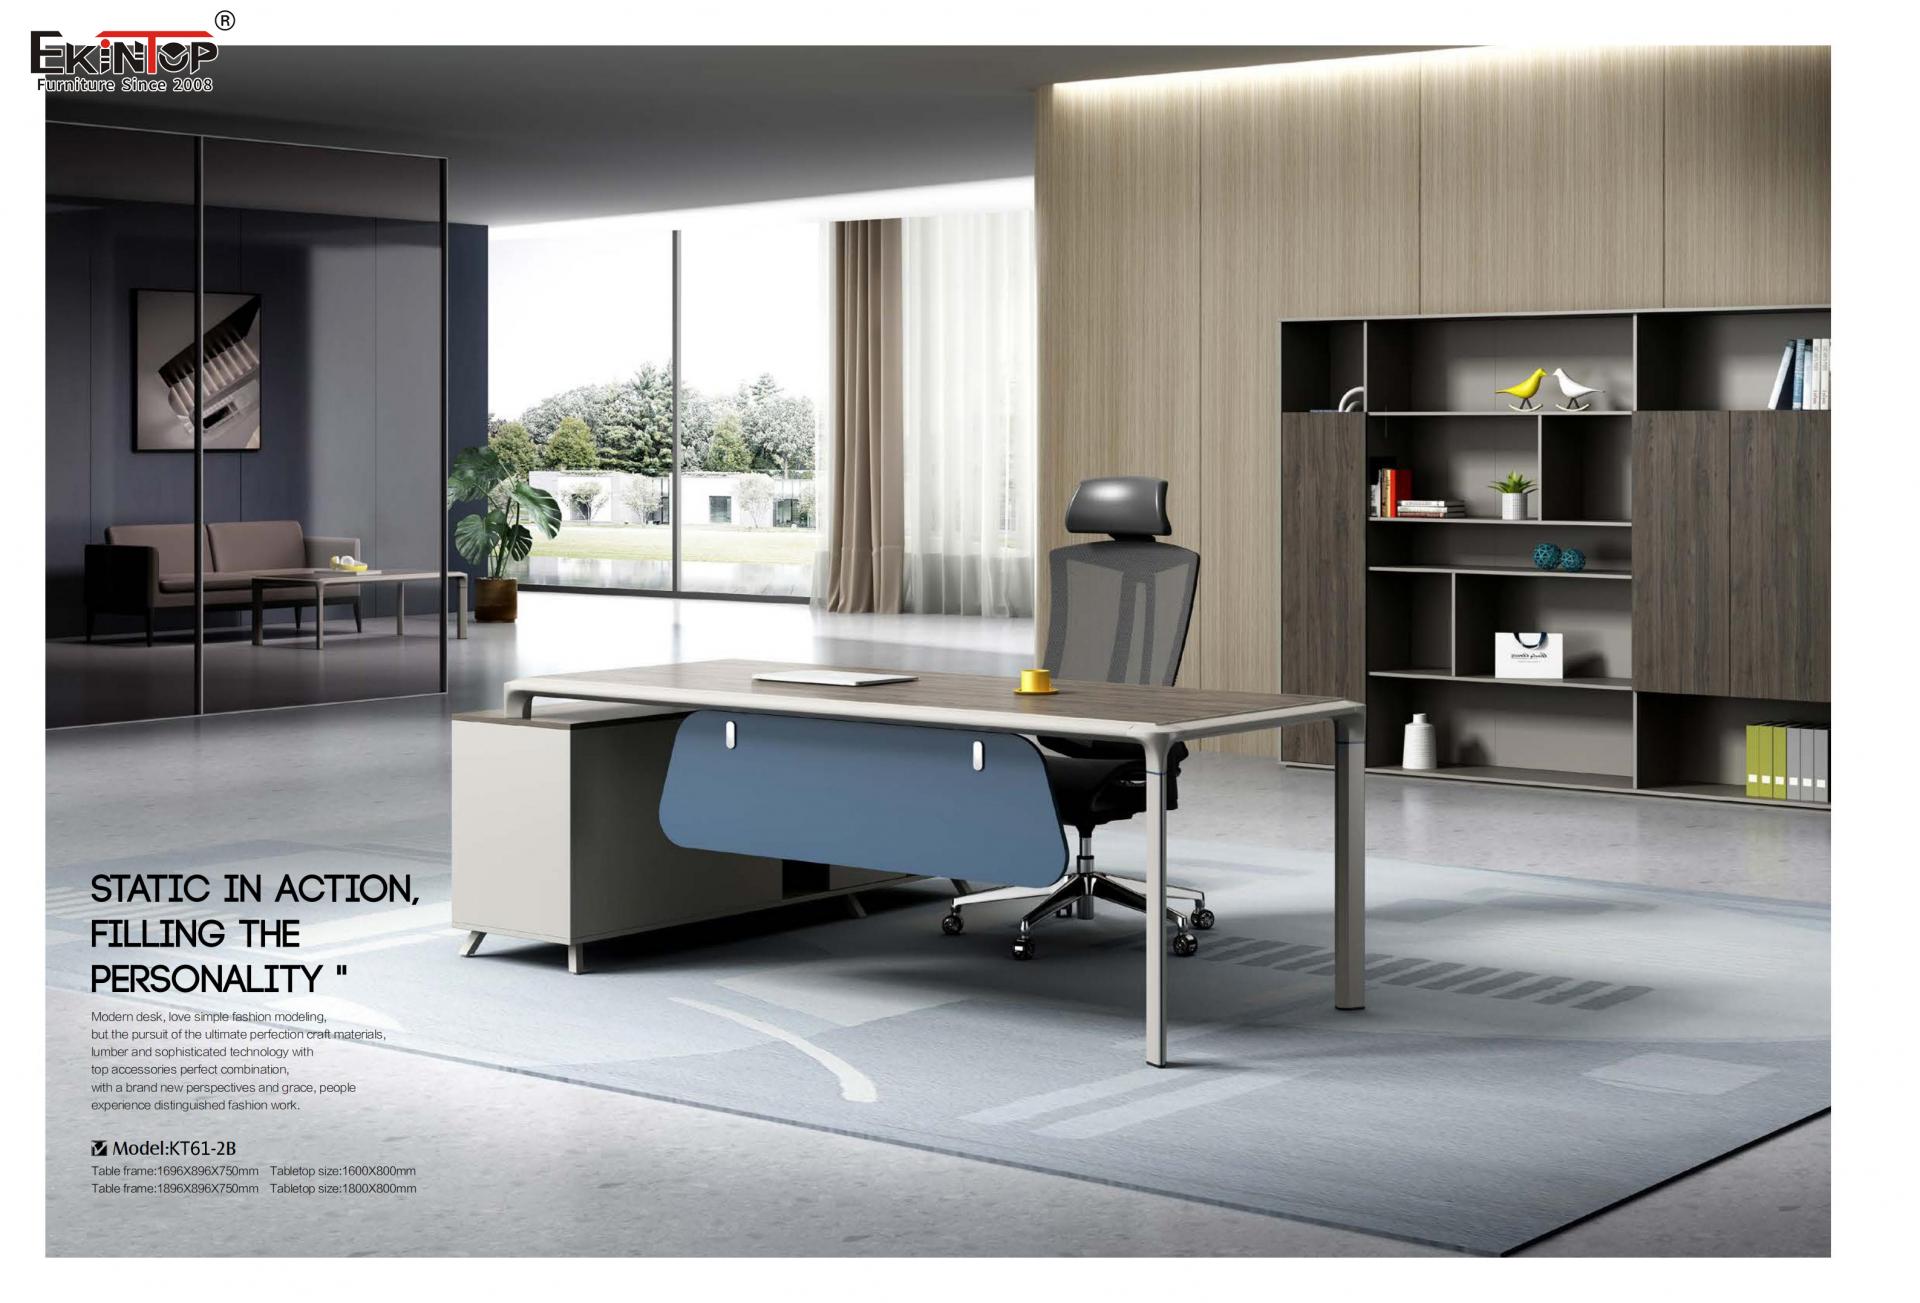 What are the common problems of customizing best office desk?